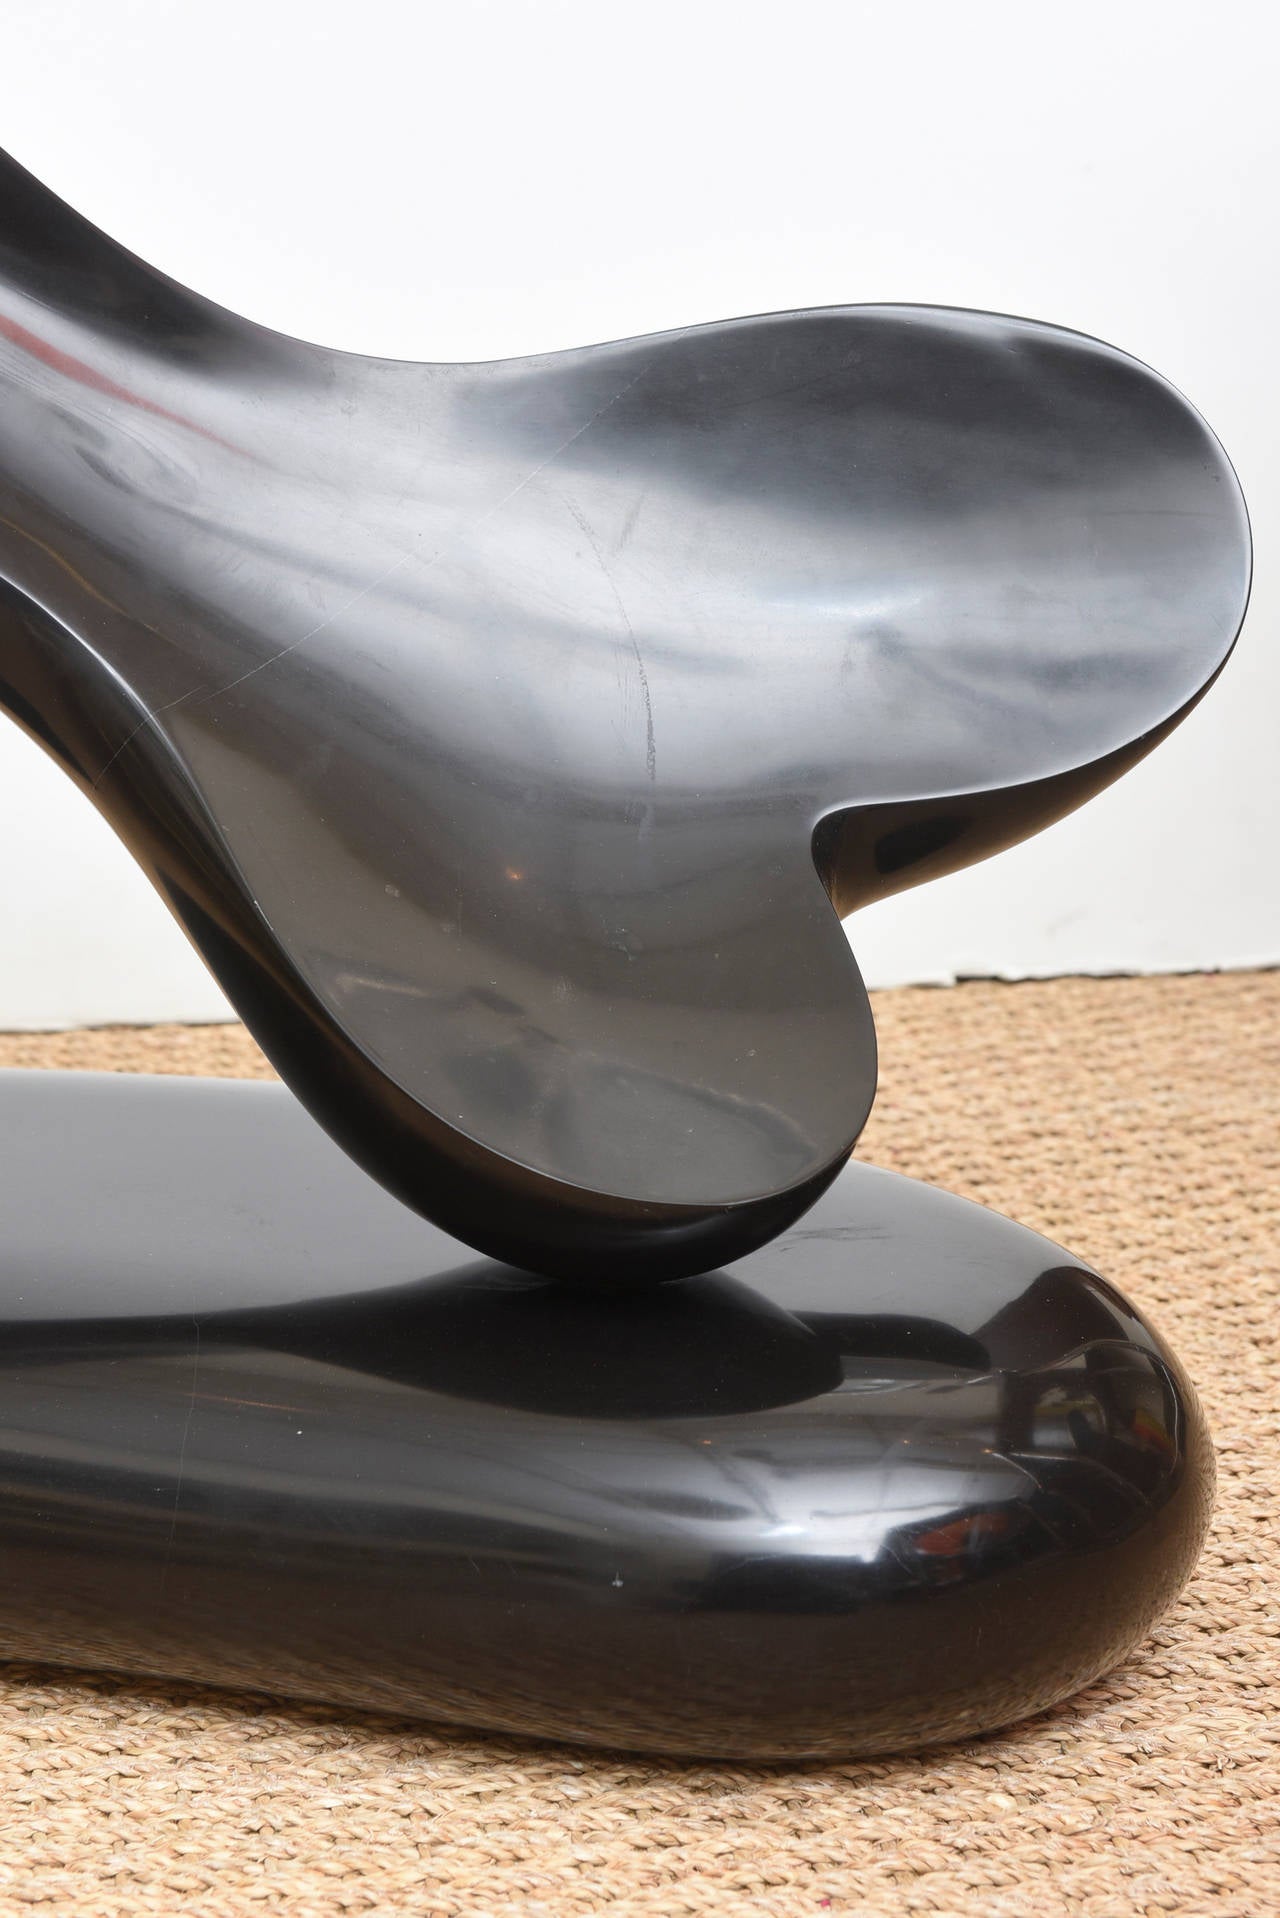 This phallic like signed abstract sculpture is by Michael Barkin. It is entitled 